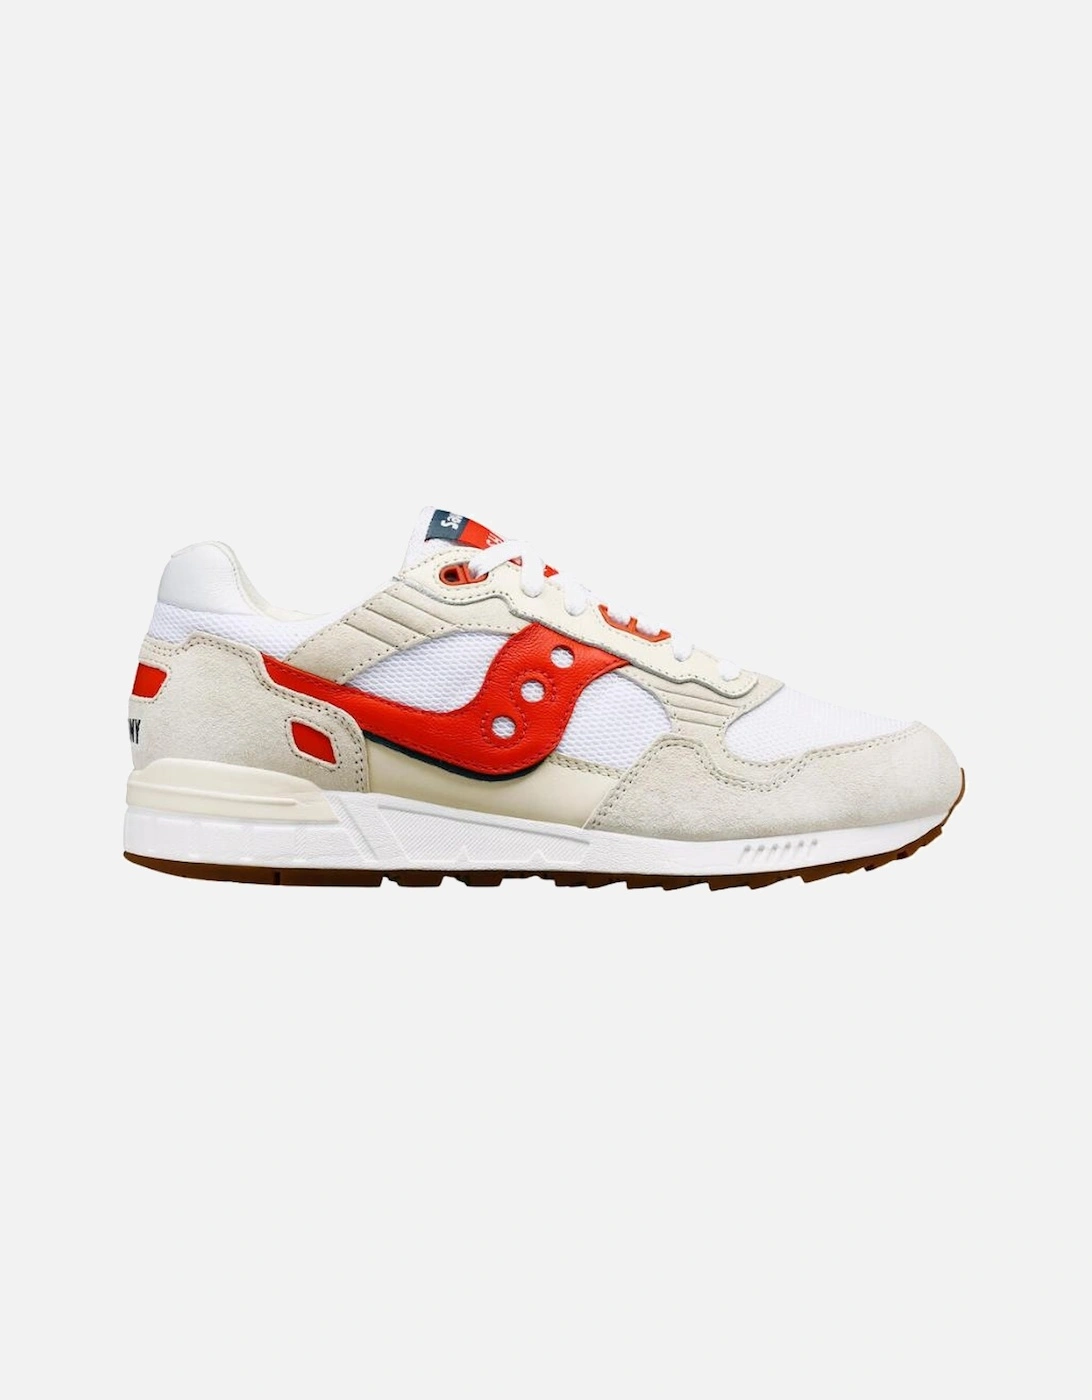 Shadow 5000 - White/Red, 7 of 6